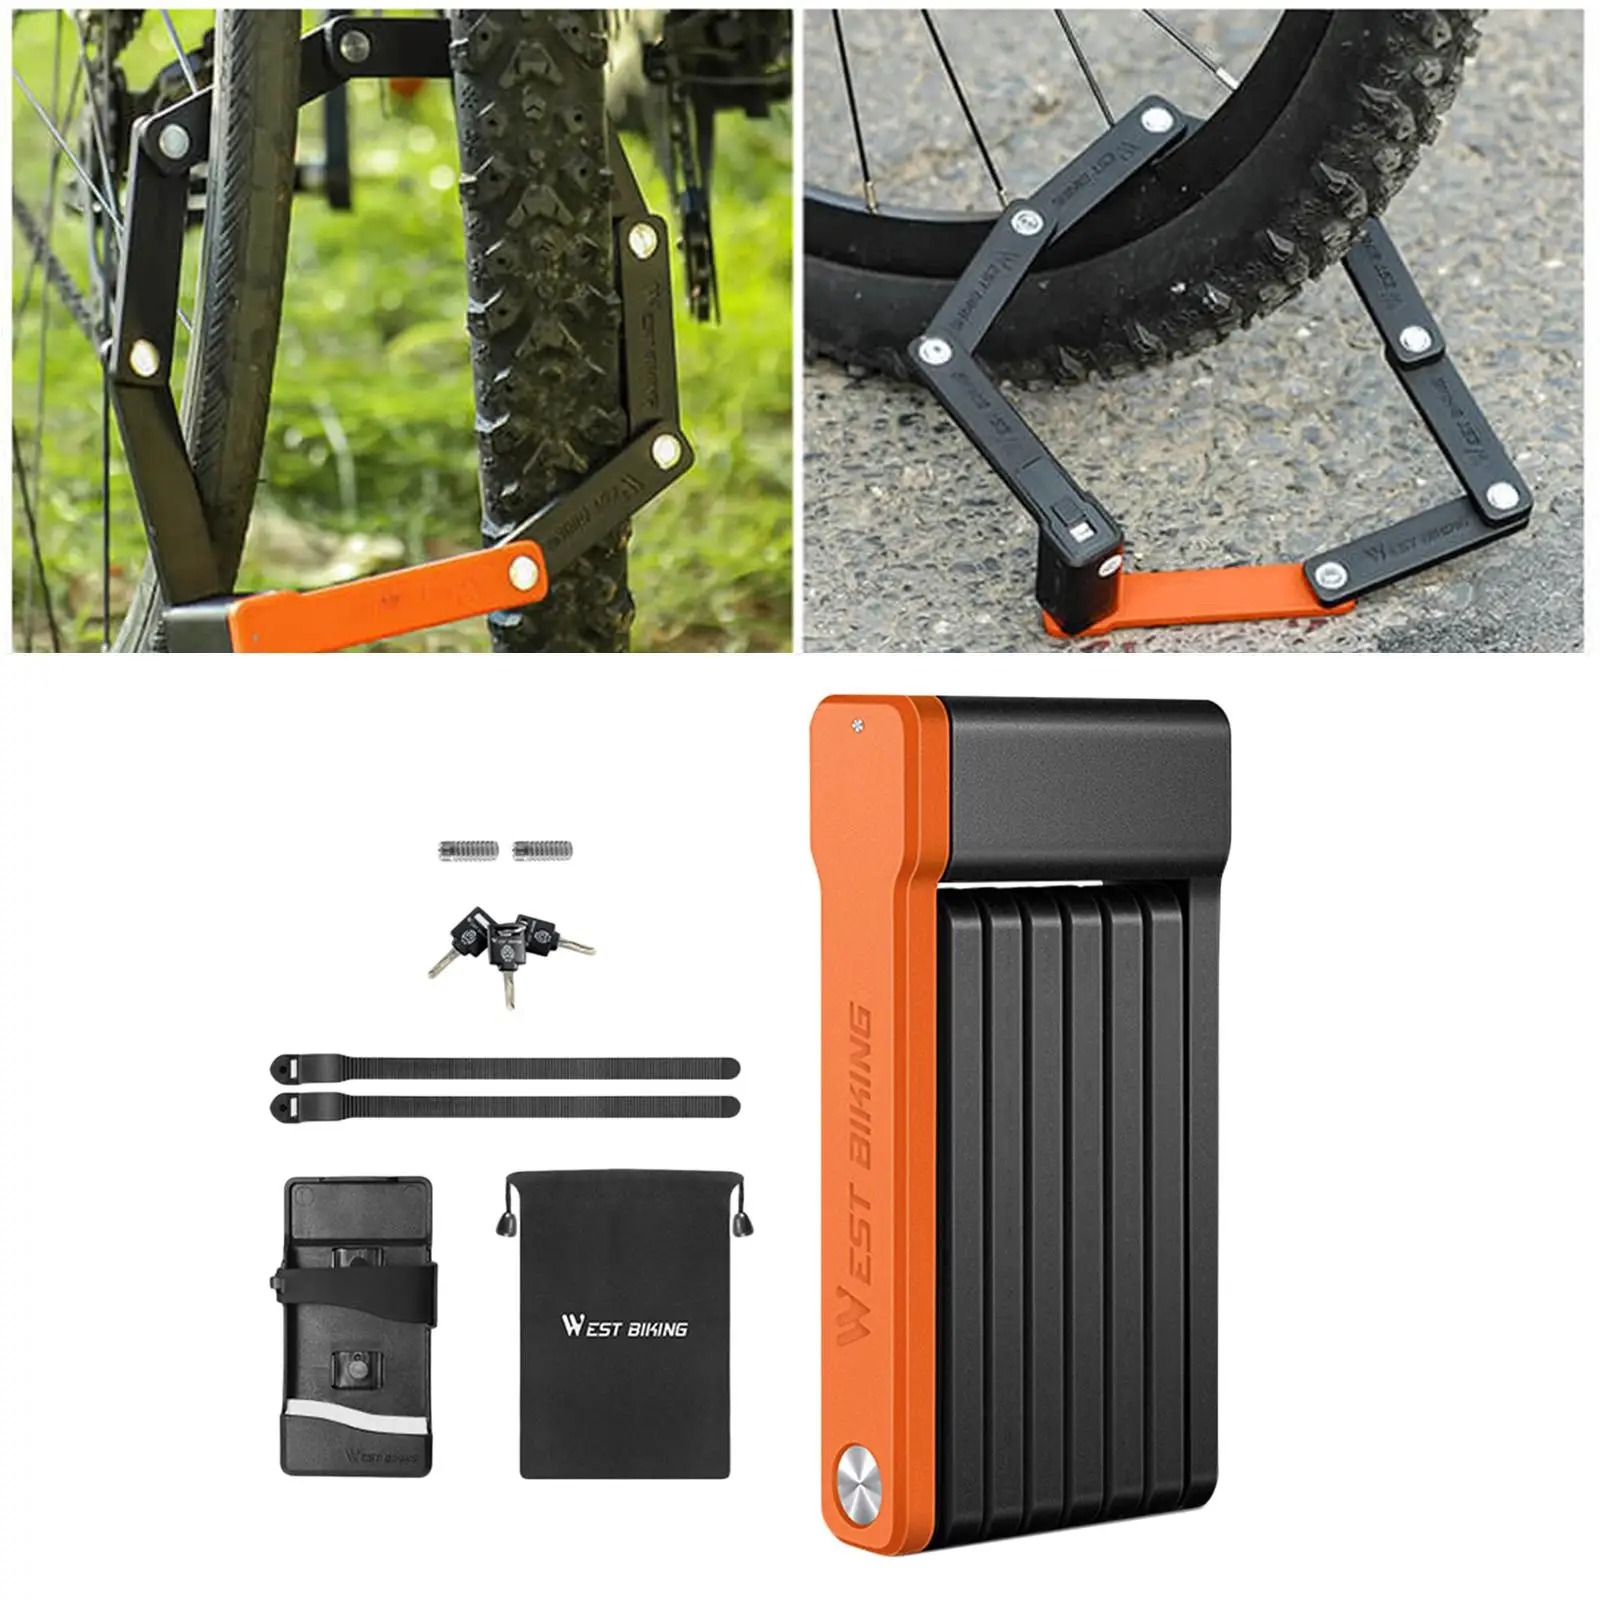 Folding Bicycle Lock Anti Theft Carrying Case Included 3 Keys High Security Anti-Slip Bike Locking Chain for Electric Scooters